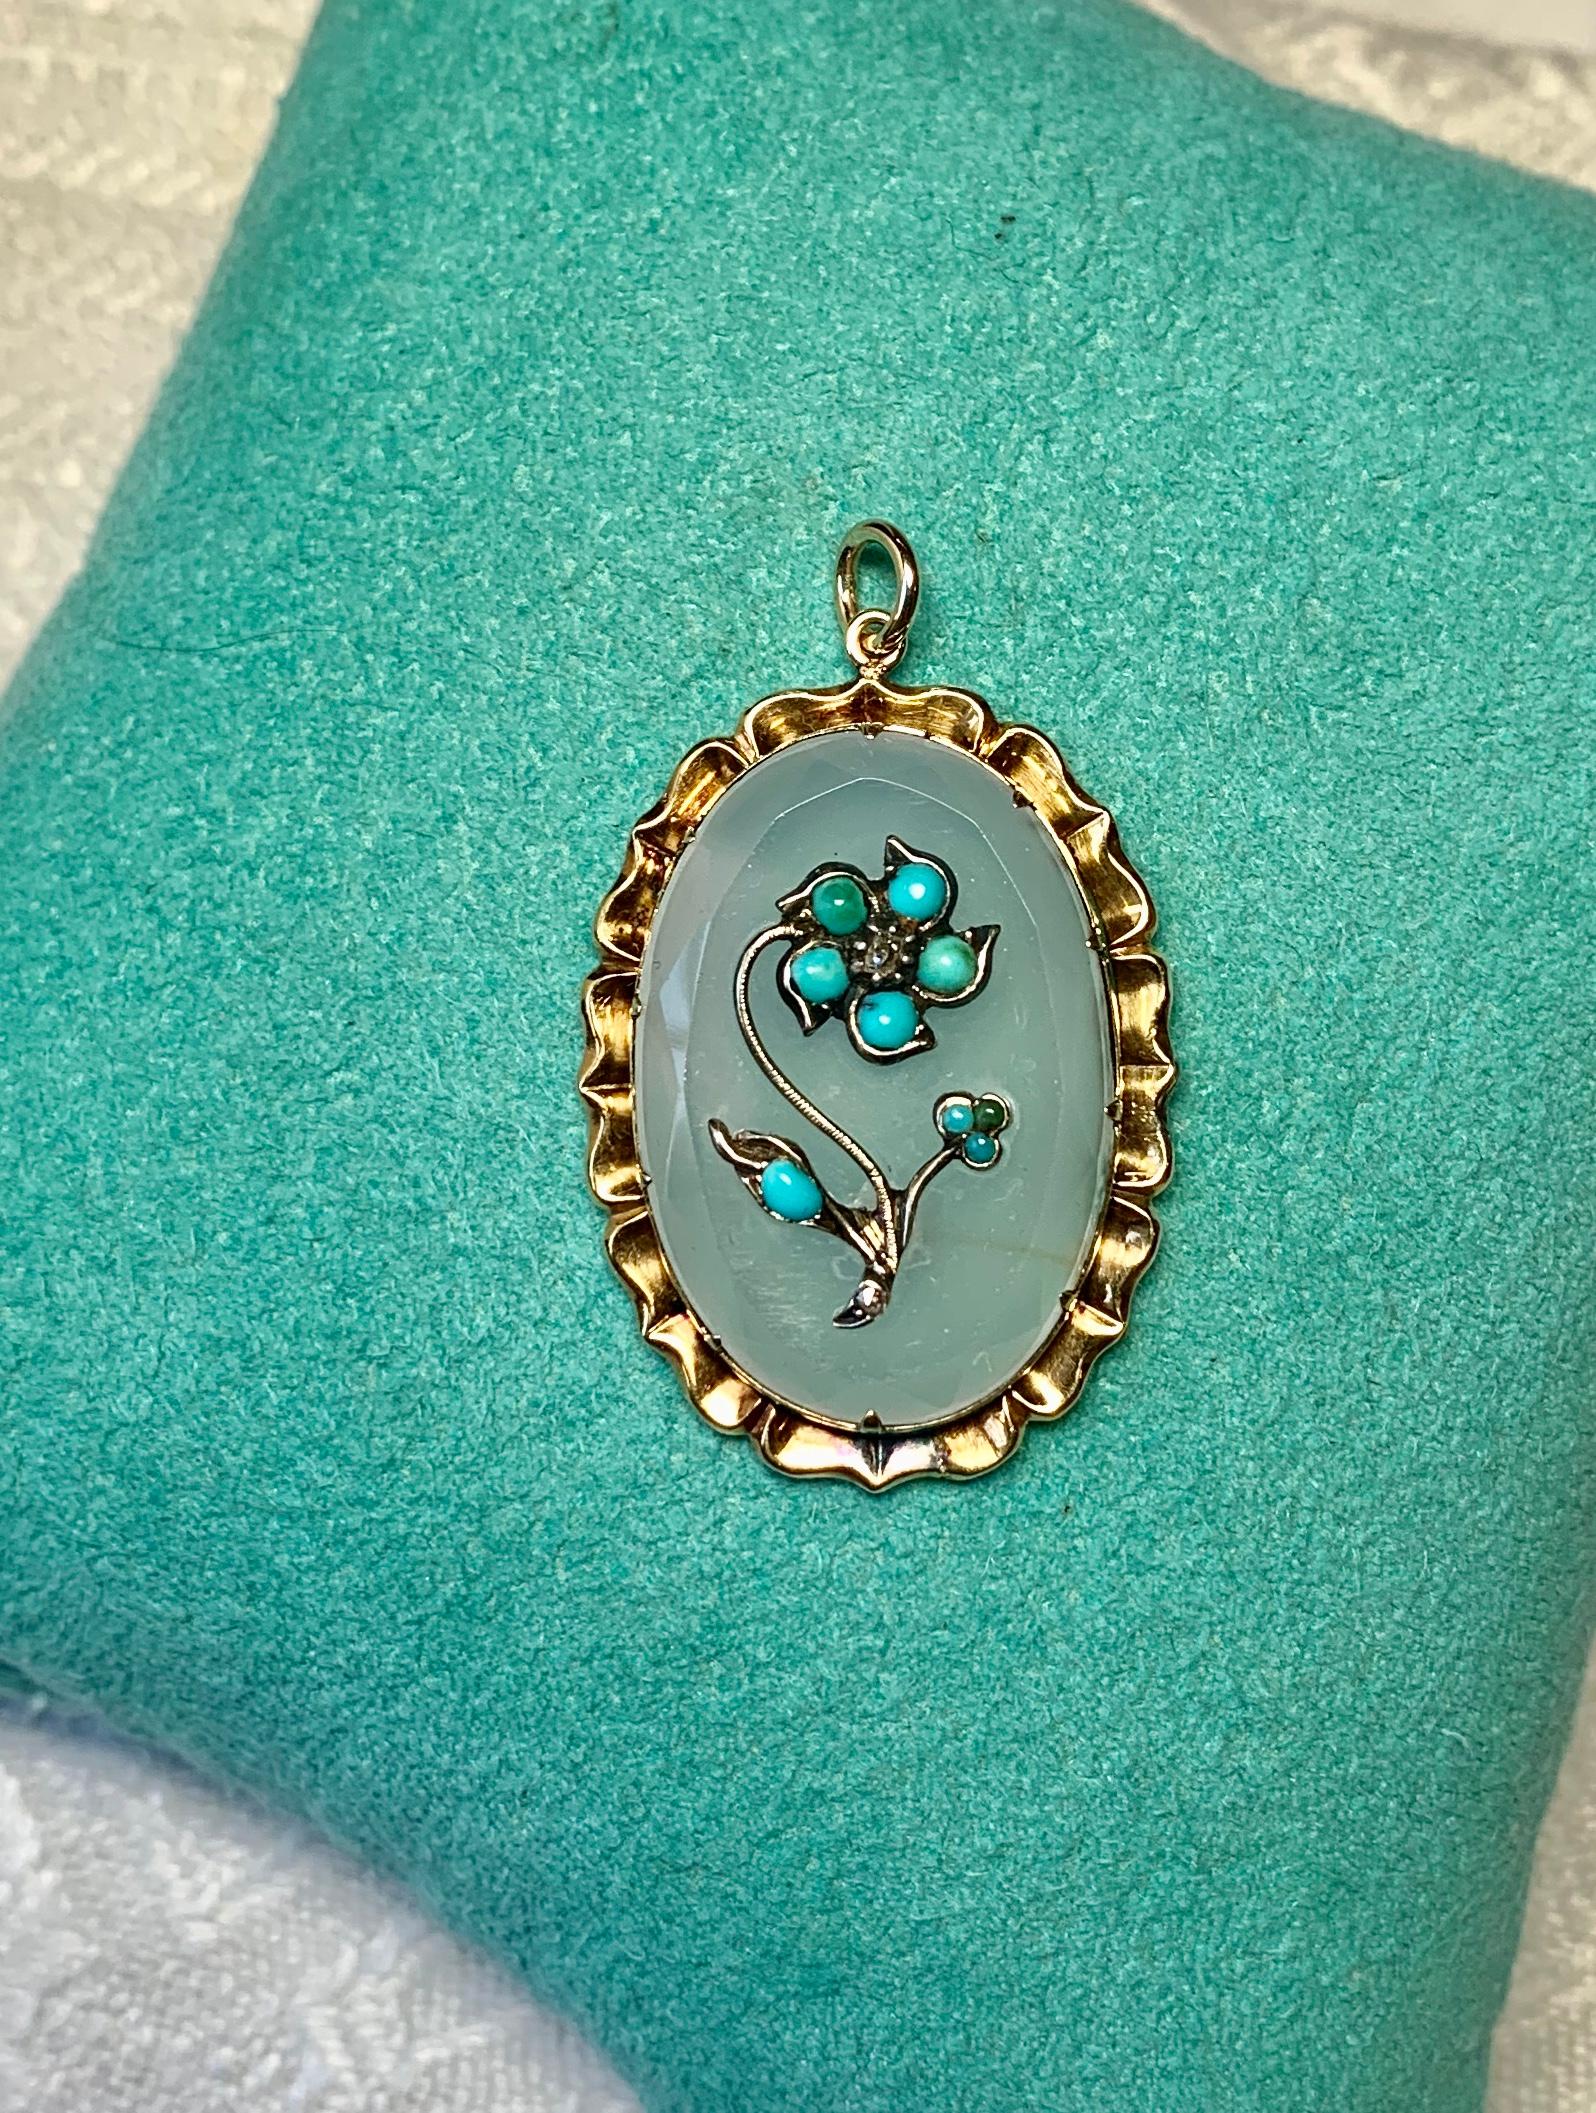 A STUNNING VICTORIAN TO ART NOUVEAU PENDANT IN BEAUTIFUL CARVED OVAL FACETED CHALCEDONY WITH A ROMANTIC 15K GOLD FULLY MODELED FLOWER MOTIF SET WITH 9 PERSIAN TURQUOISE FLOWER PETALS AND A ROSE CUT DIAMOND CENTER.  THE CHALCEDONY IS SET IN A LOVELY